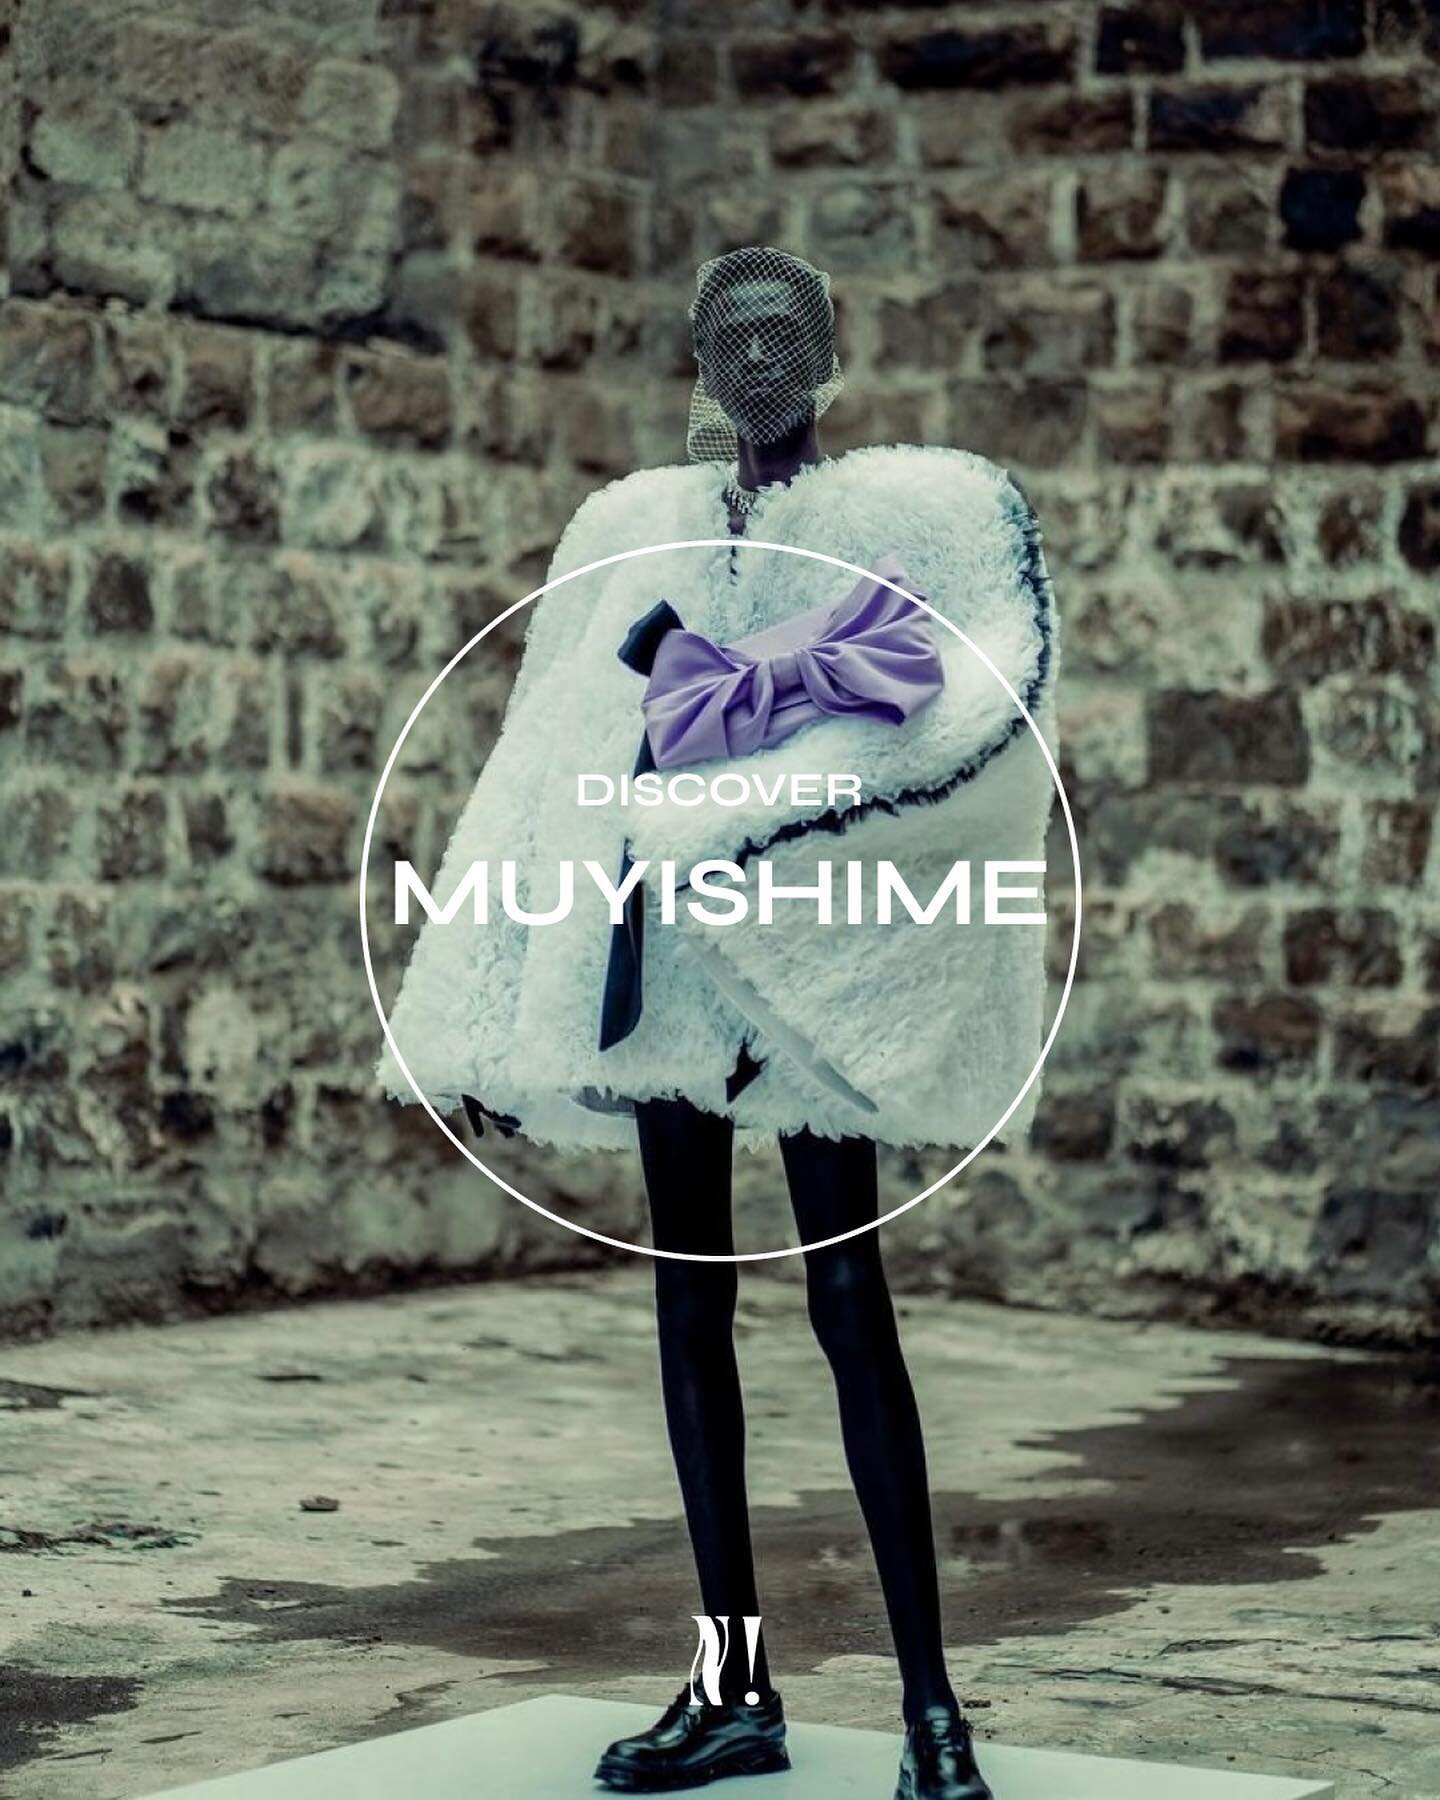 [DISCOVER] What started as an artistic endeavour for Nairobi-based designer Muyishime Edi Patrick in 2016 has grown to be a contemporary luxury brand pushing for circular practices, and body inclusivity.
⠀⠀⠀⠀⠀⠀⠀⠀⠀⠀⠀⠀ &nbsp;⠀⠀⠀⠀⠀⠀⠀⠀⠀⠀⠀⠀
The Muyishime 